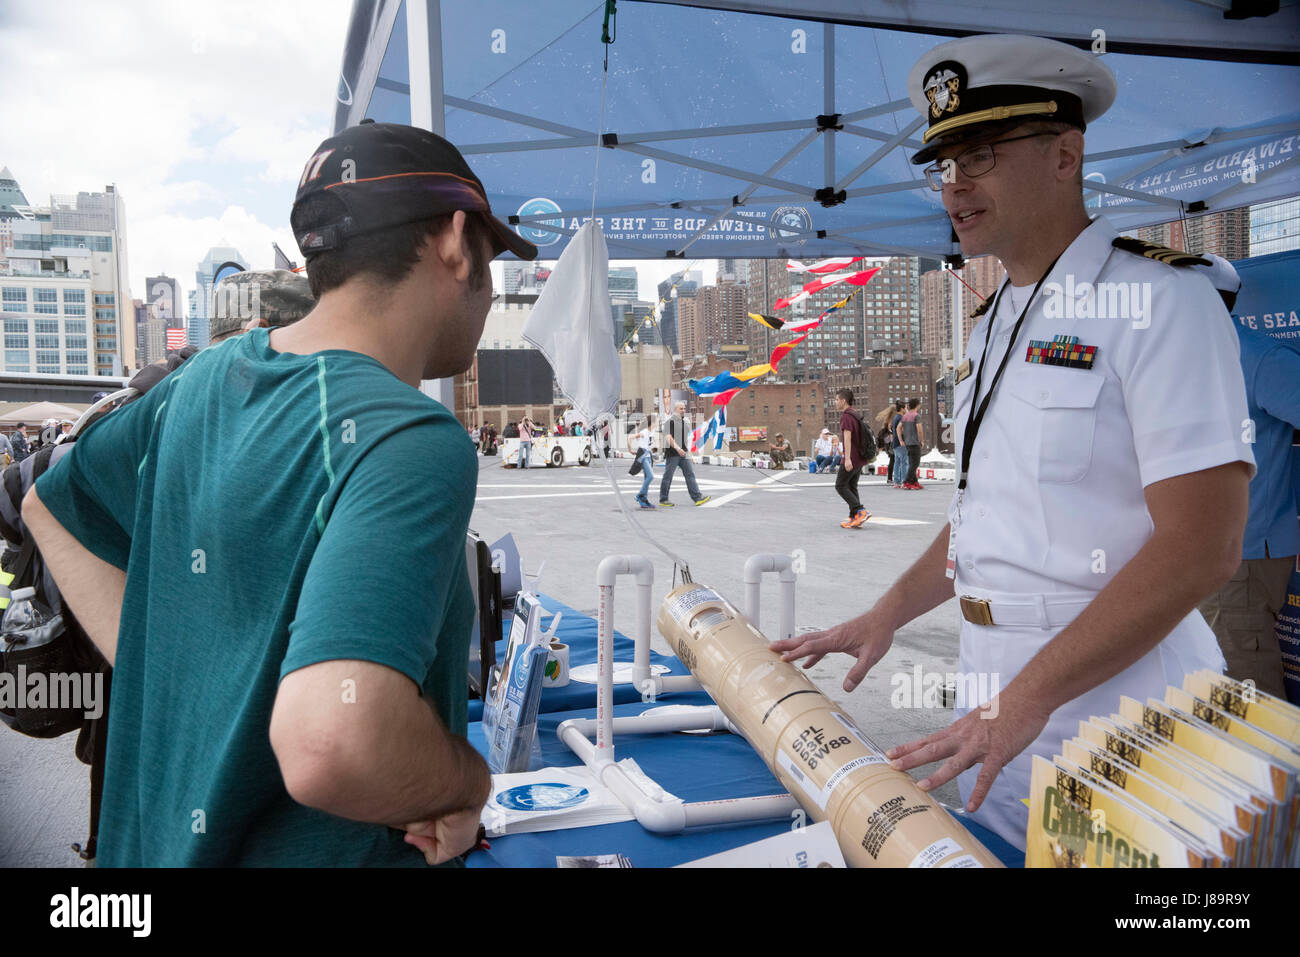 170526-N-MS174-003 NEW YORK (May 26, 2017) Lt. Cmdr. James McLeod, a public affairs officer assigned to U.S. Fleet Forces Command, talks about how sonobouys are used to detect frequencies and signals in the water with a visitor at the U.S. Navy’s “Stewards of the Sea: Defending Freedom, Protecting the Environment” exhibit aboard the amphibious assault ship USS Kearsarge (LHD 3) during Fleet Week New York. The Navy employs every means available to mitigate the potential environmental effects of our activities without jeopardizing the safety of our Sailors or impacting our Navy readiness mission Stock Photo